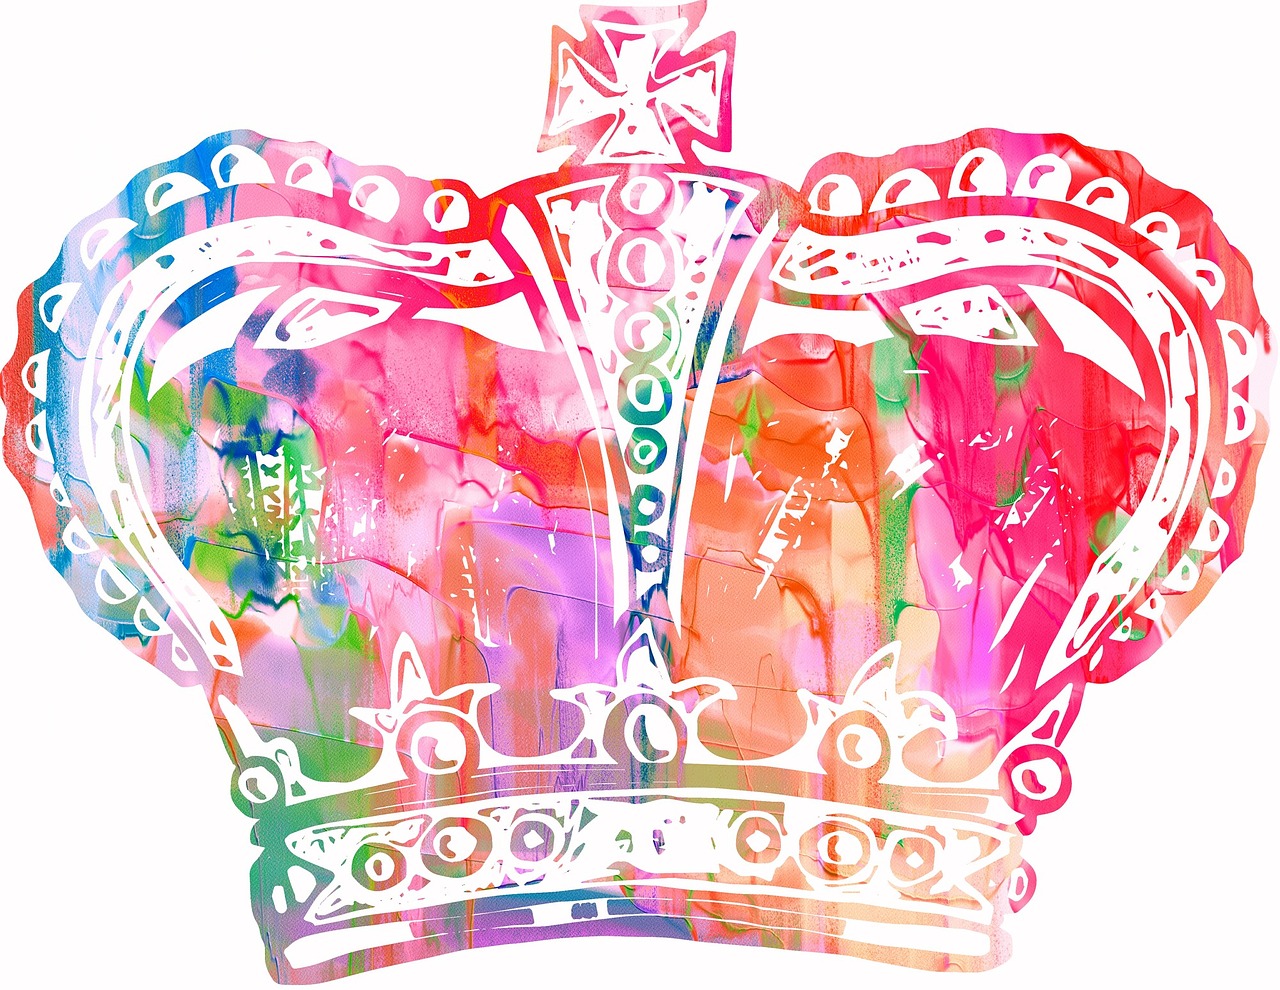 Graphic of a crown.